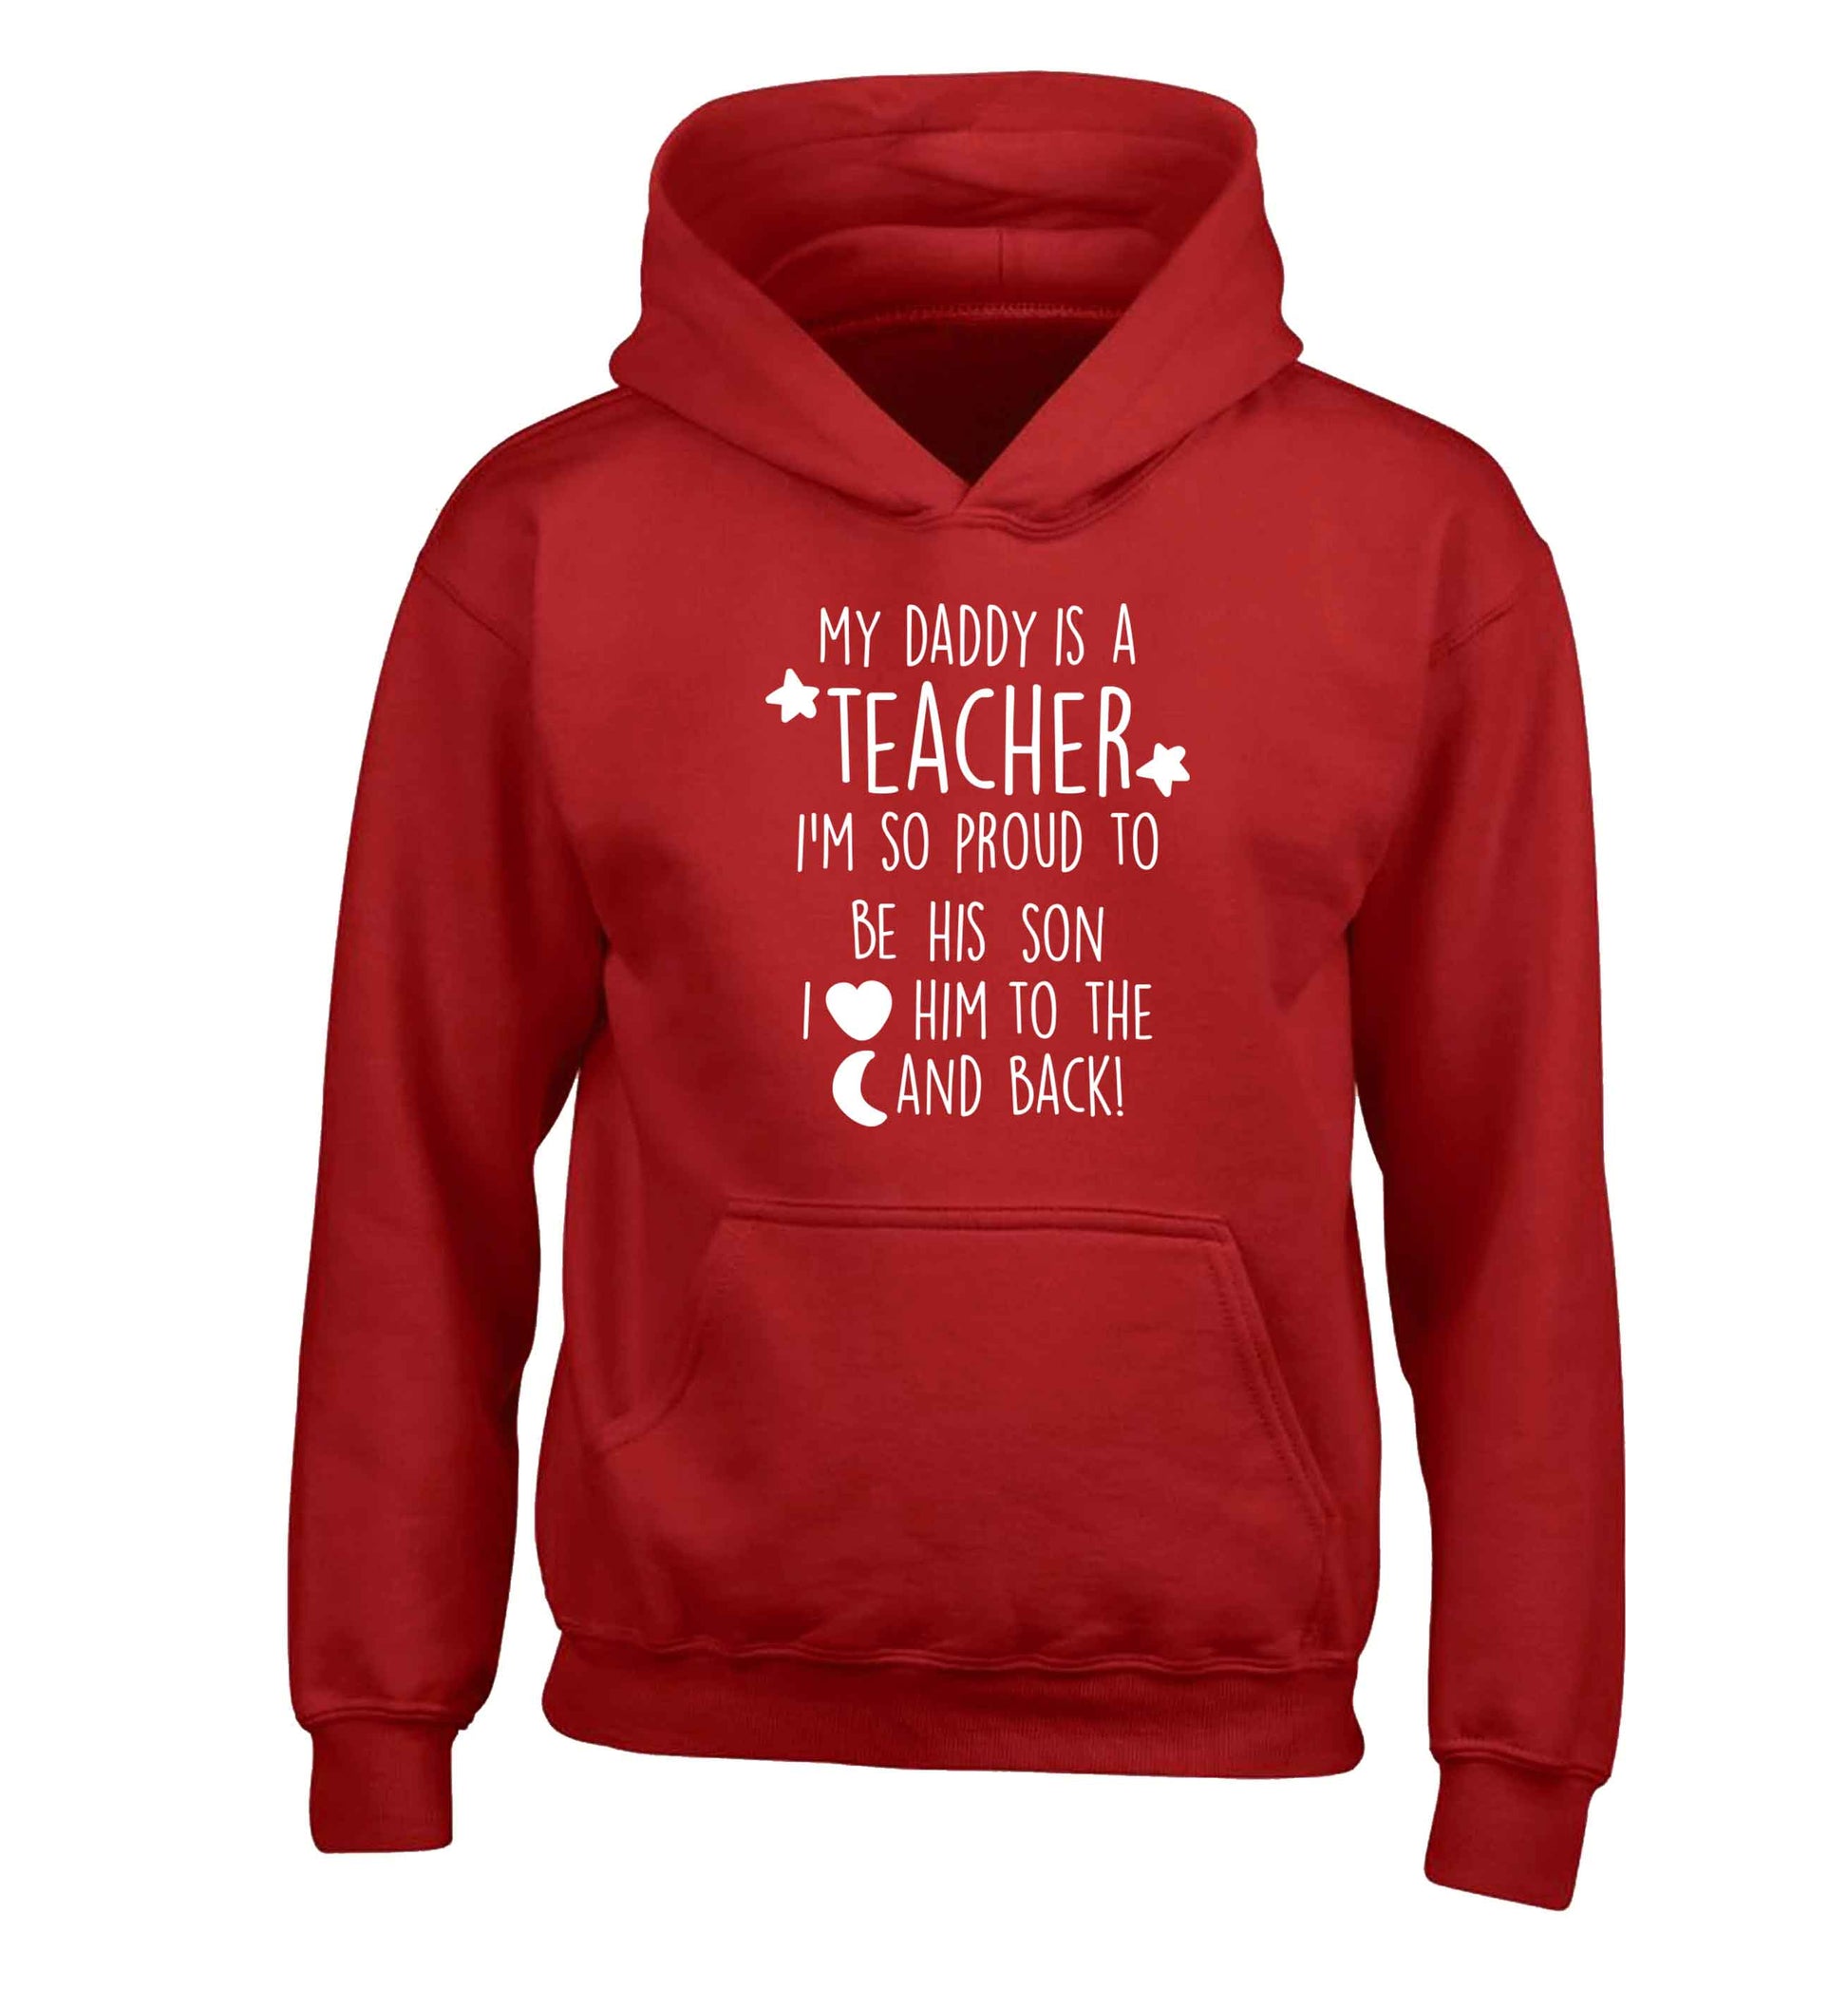 My daddy is a teacher I'm so proud to be his son I love her to the moon and back children's red hoodie 12-13 Years